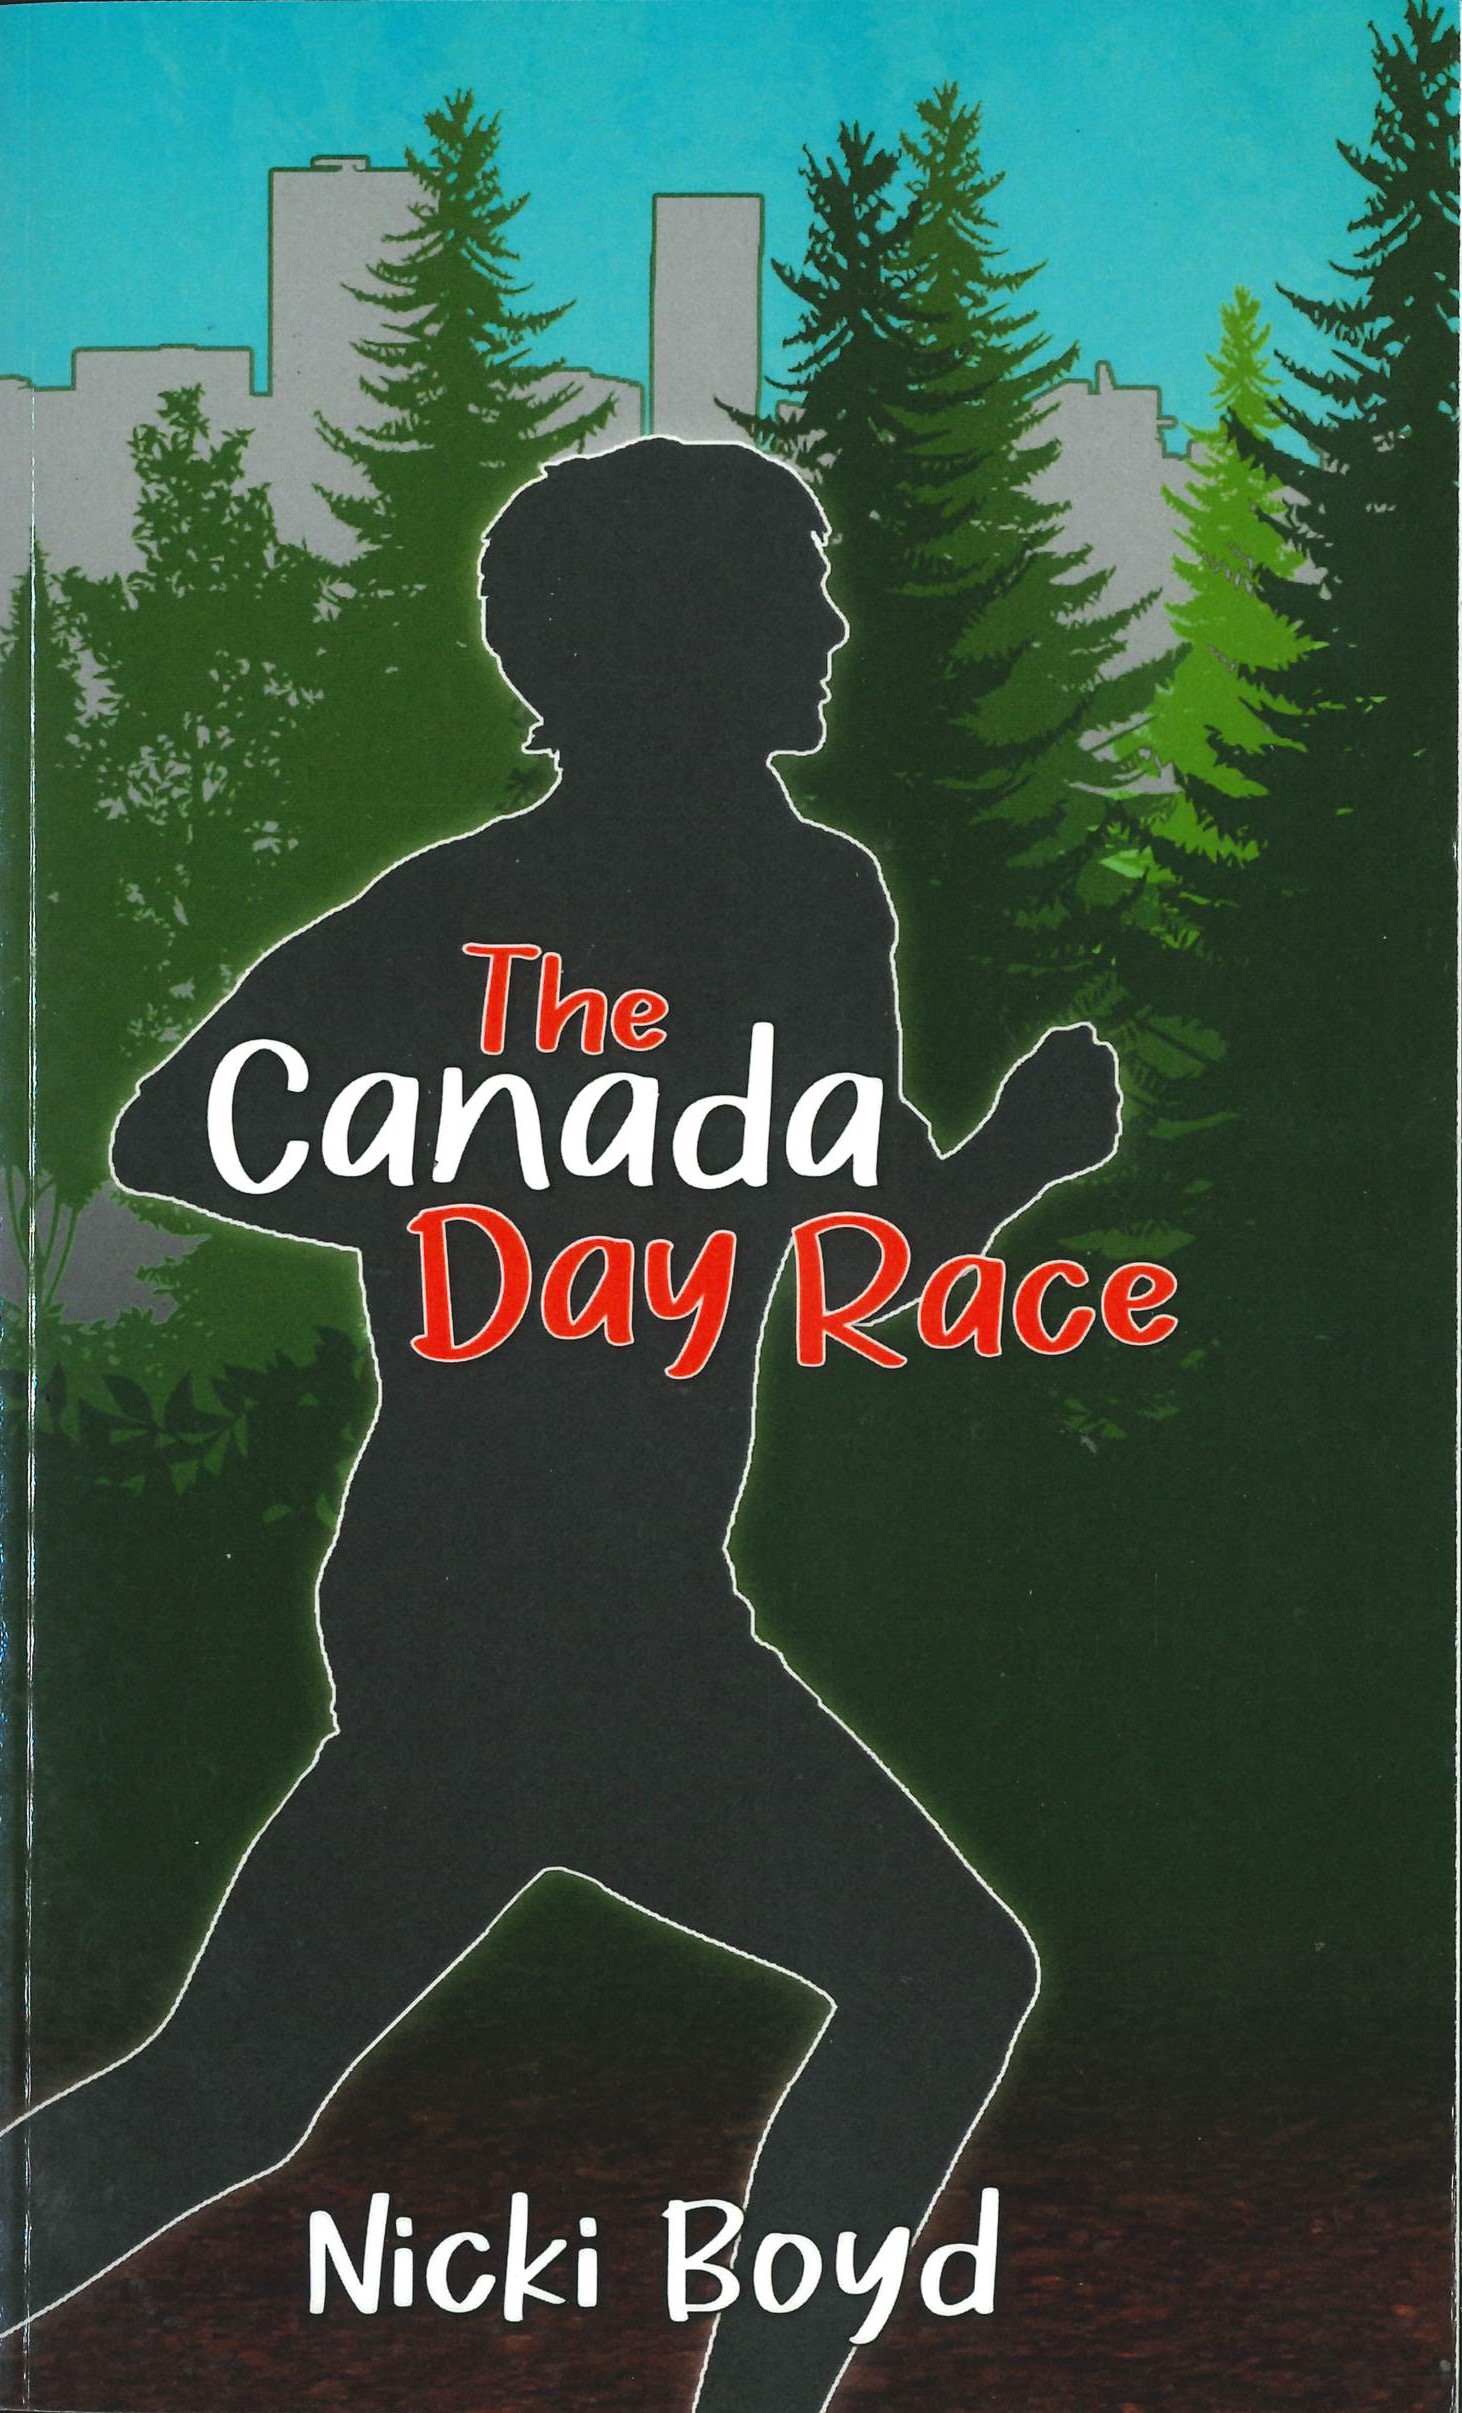 The Canada Day Race